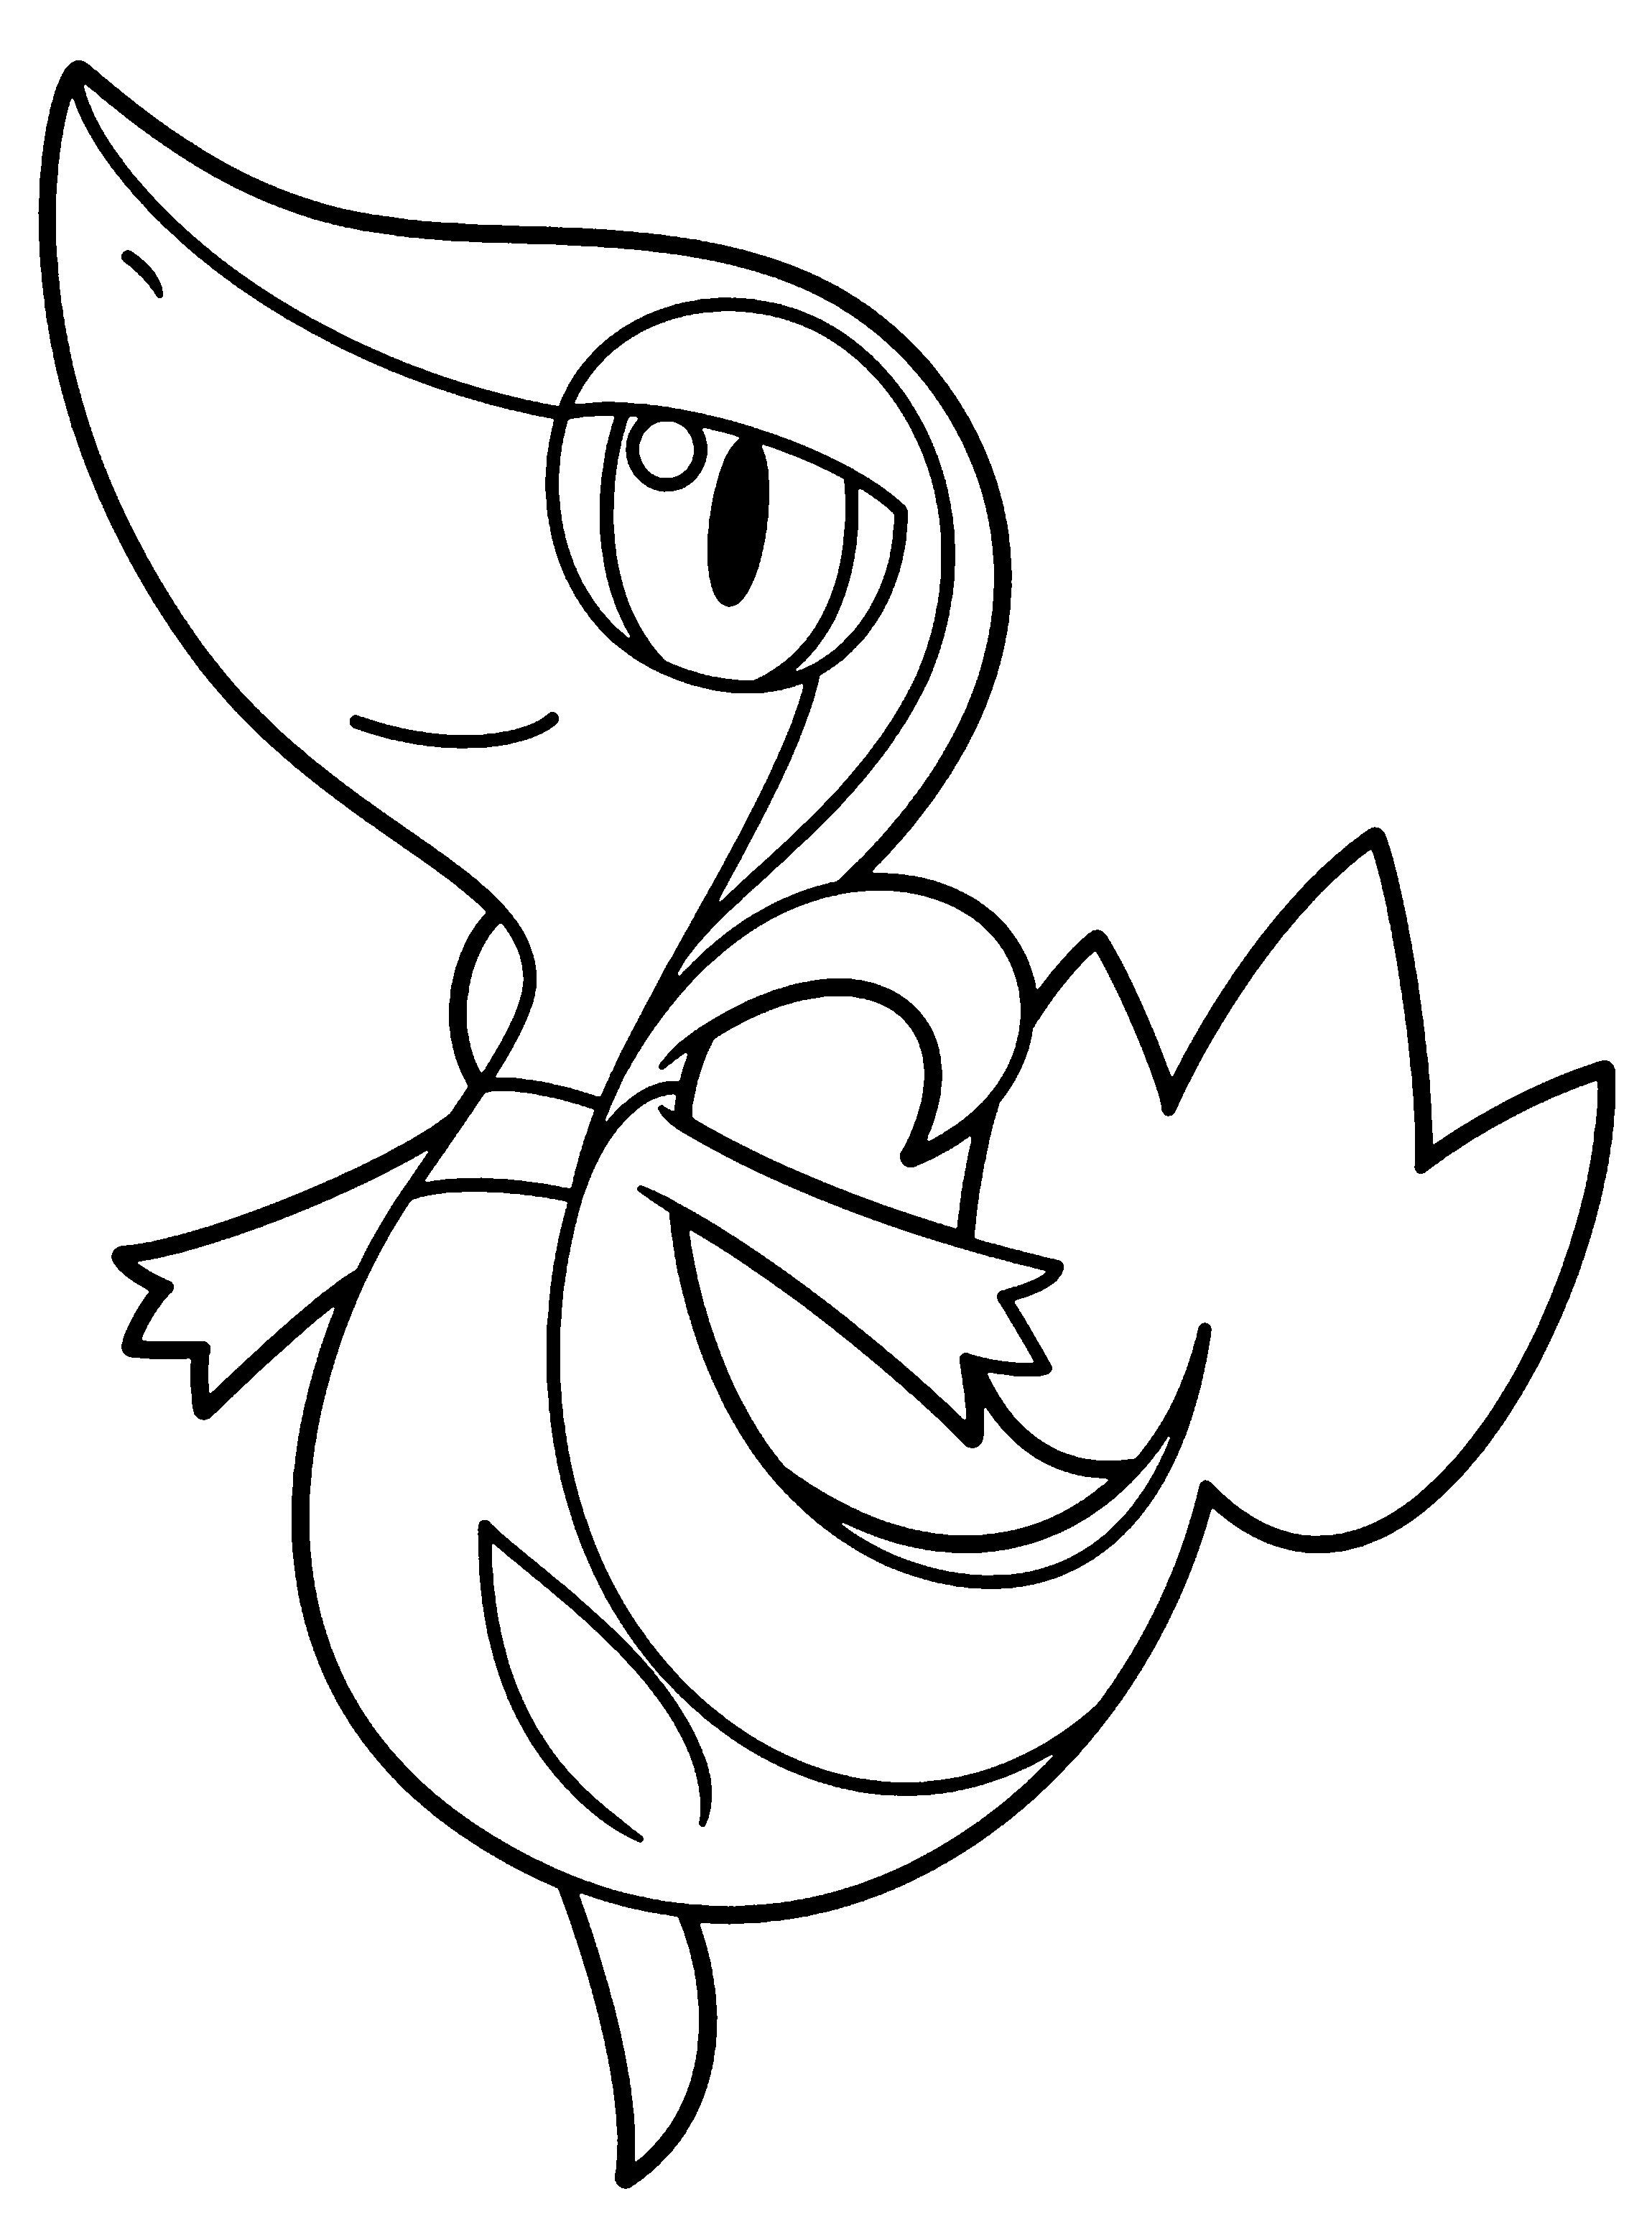 Ivy Pokemon Coloring Pages | Pokemon coloring pages, Cartoon ...